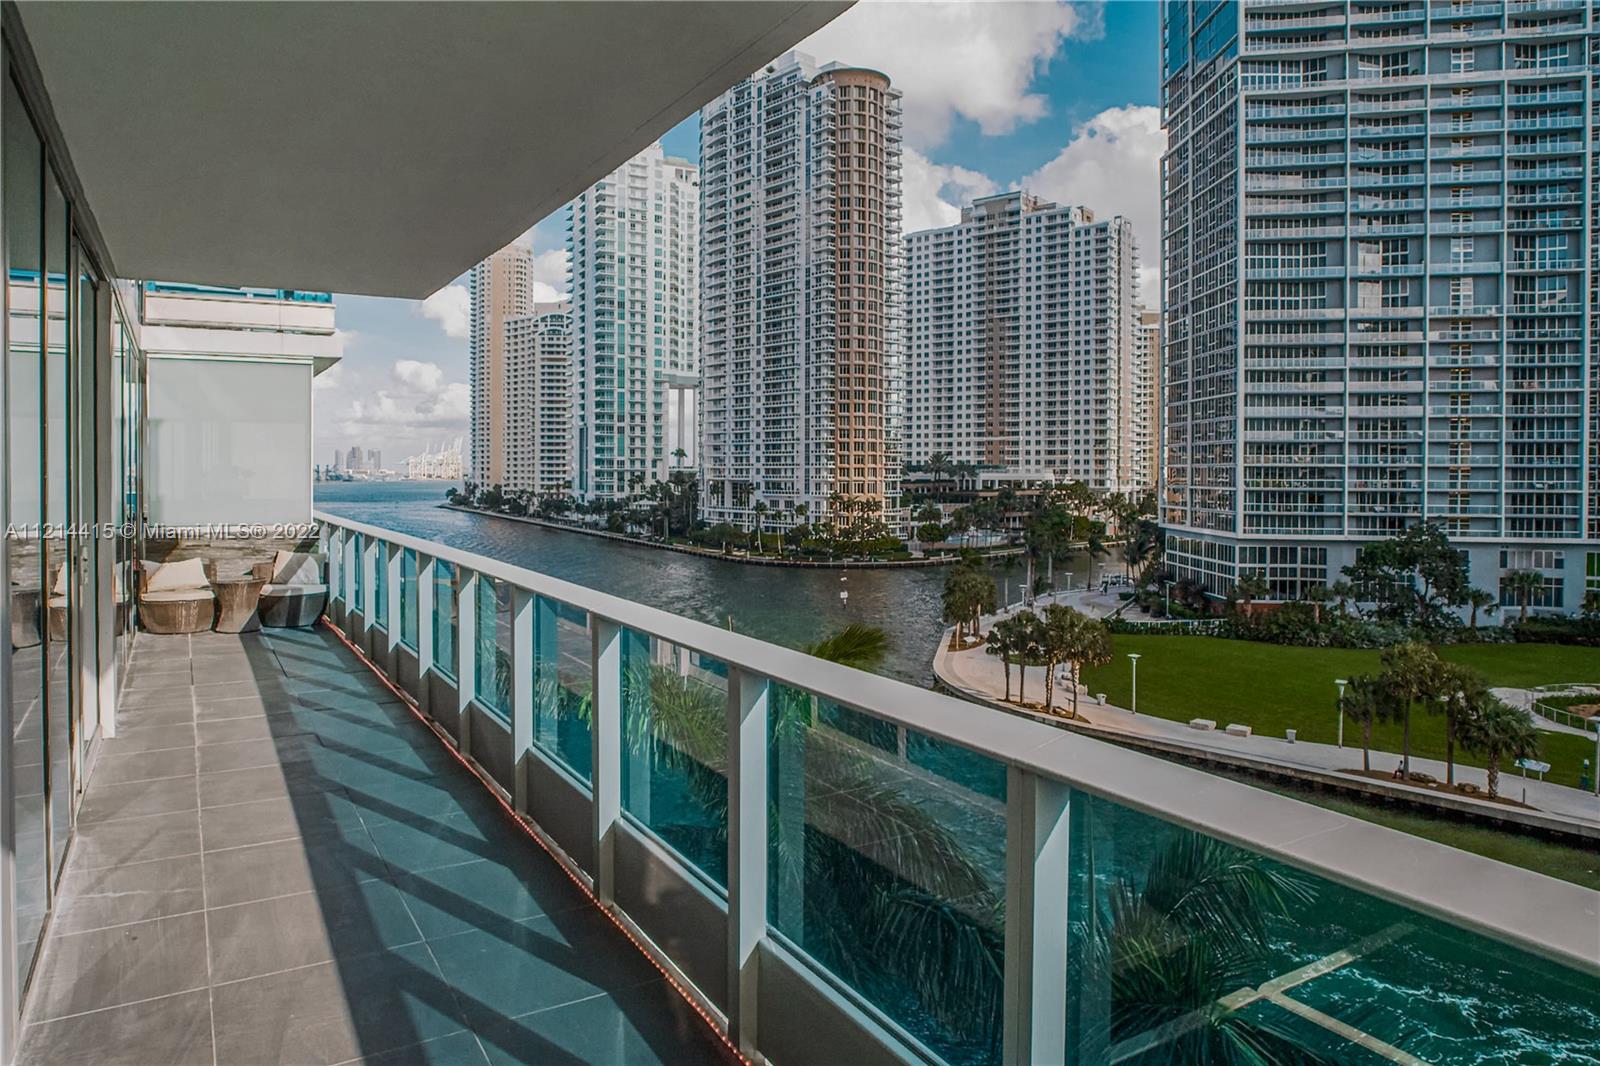 Live Limitlessly in this spectacular two-story unit overlooking Biscayne Bay and the Miami River. Featuring high ceilings with tons of natural light, spacious walk-in closets and a generous sized terrace. This modern-day residence has been renovated with brand new tile flooring, an encased glass staircase, and updated touches throughout. Utilize the den area as an additional bedroom for overnight guests or a home office. Whether it's basking out on the terrace to watch the boats go by or simply walking across the street for a quick grocery run at Whole Foods, you can't go wrong with one of Miami's most prized locations.